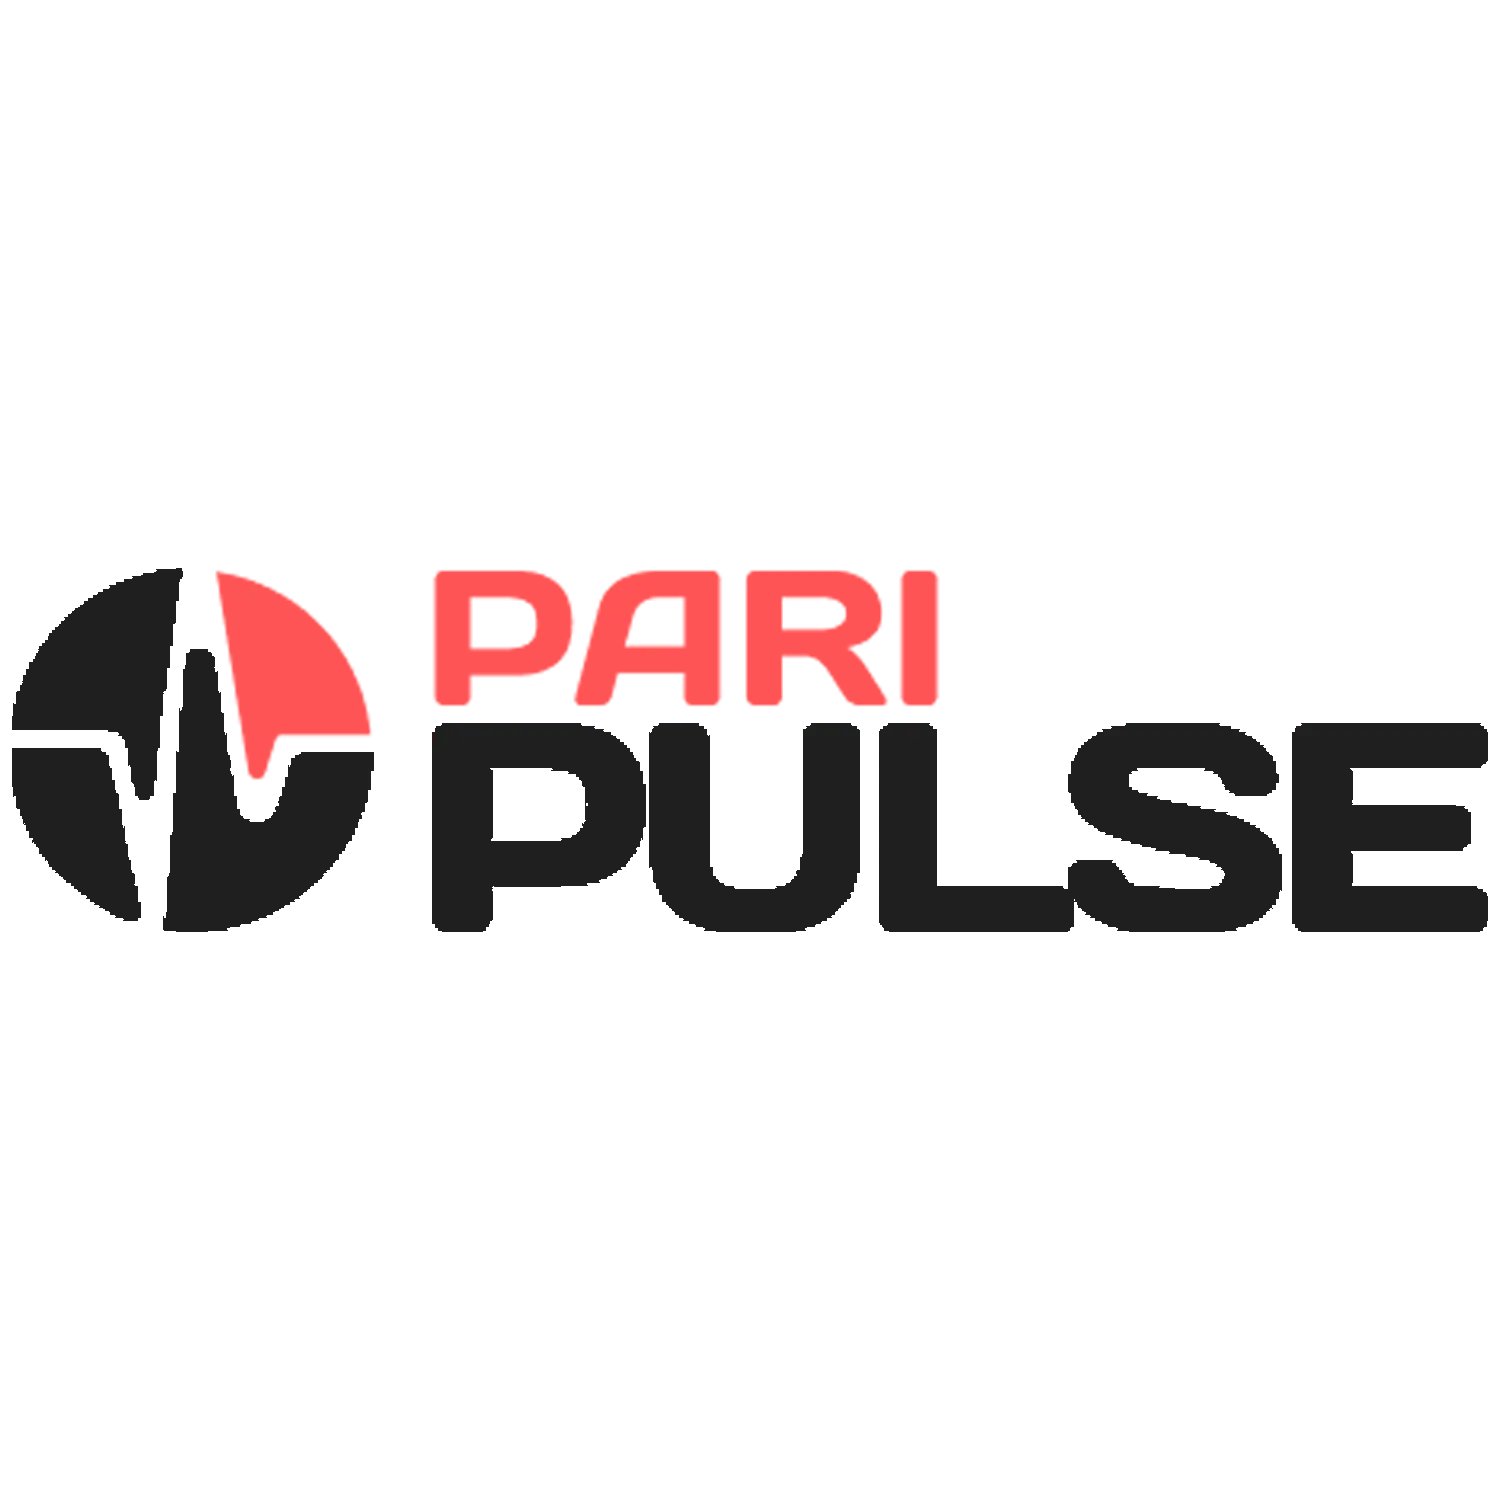 Play and get wins with PariPulse.